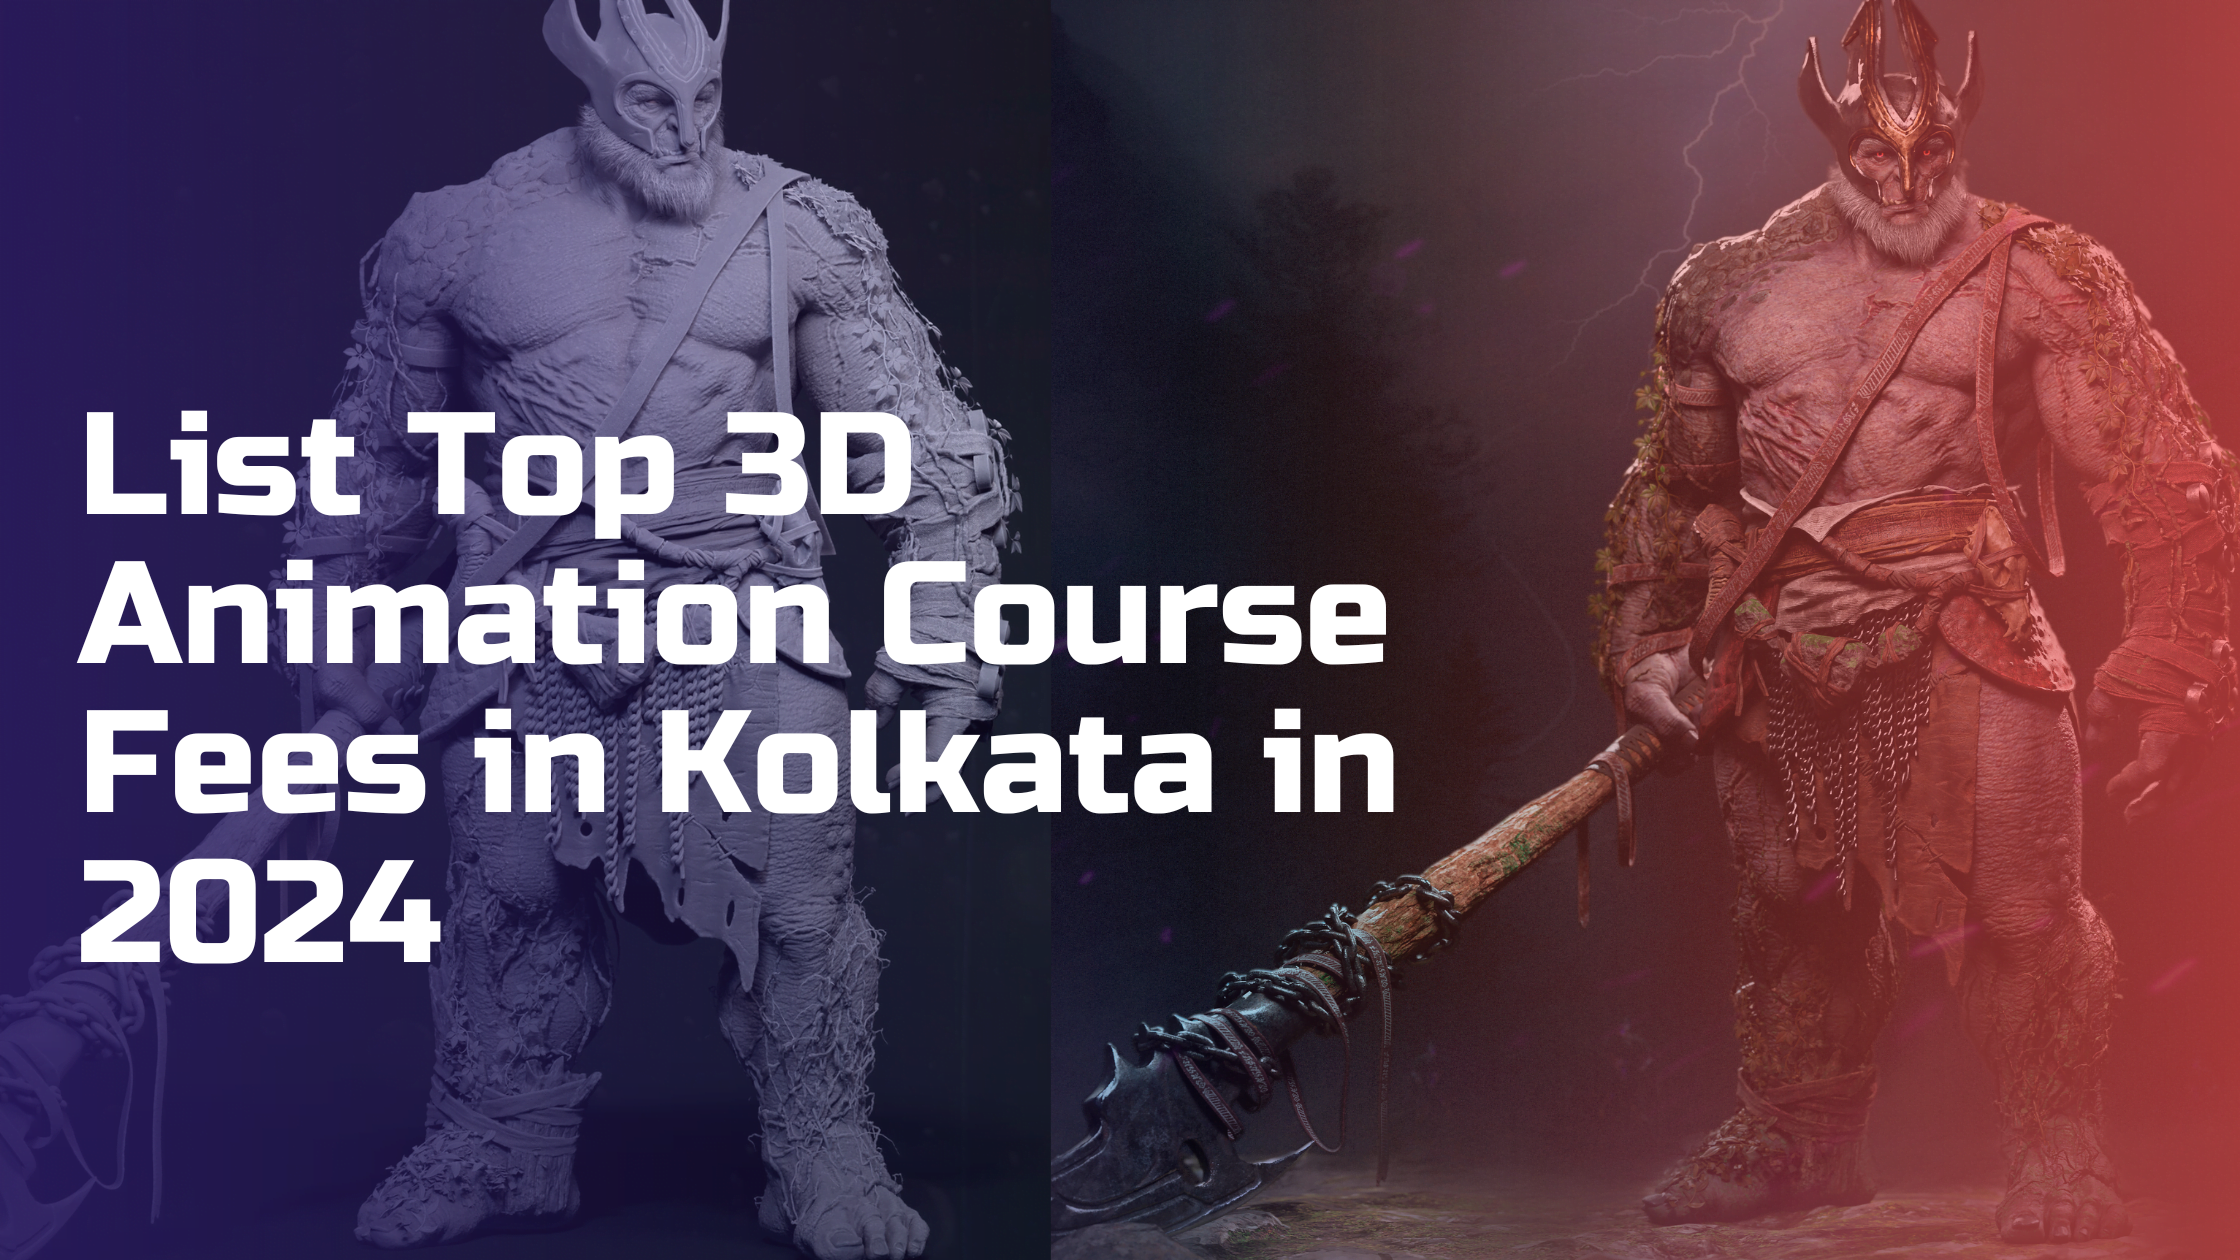 List Top 3D Animation Course Fees in Kolkata in 2024